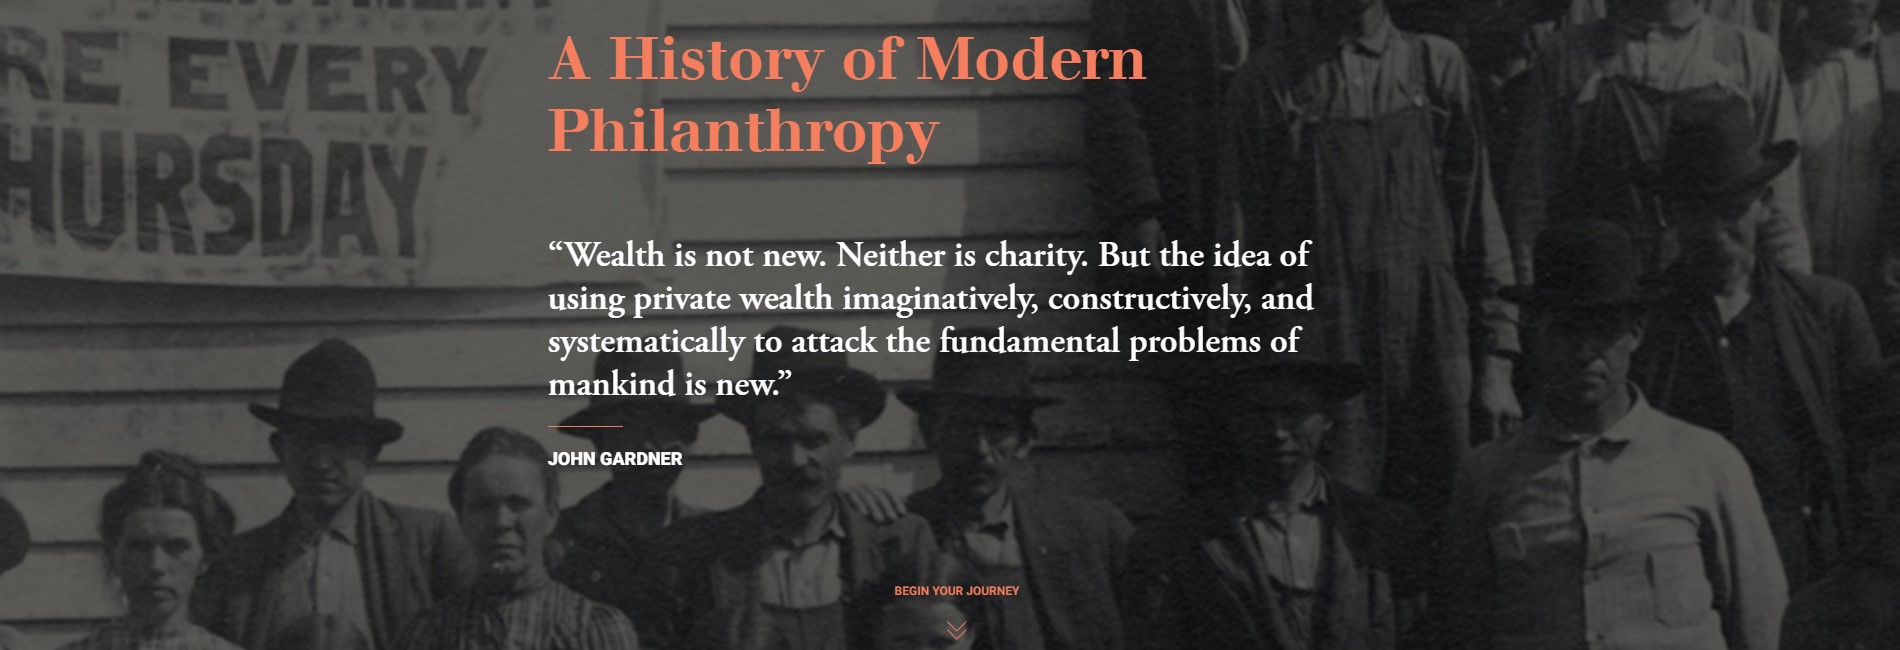 history of giving - National Philanthropic Trust